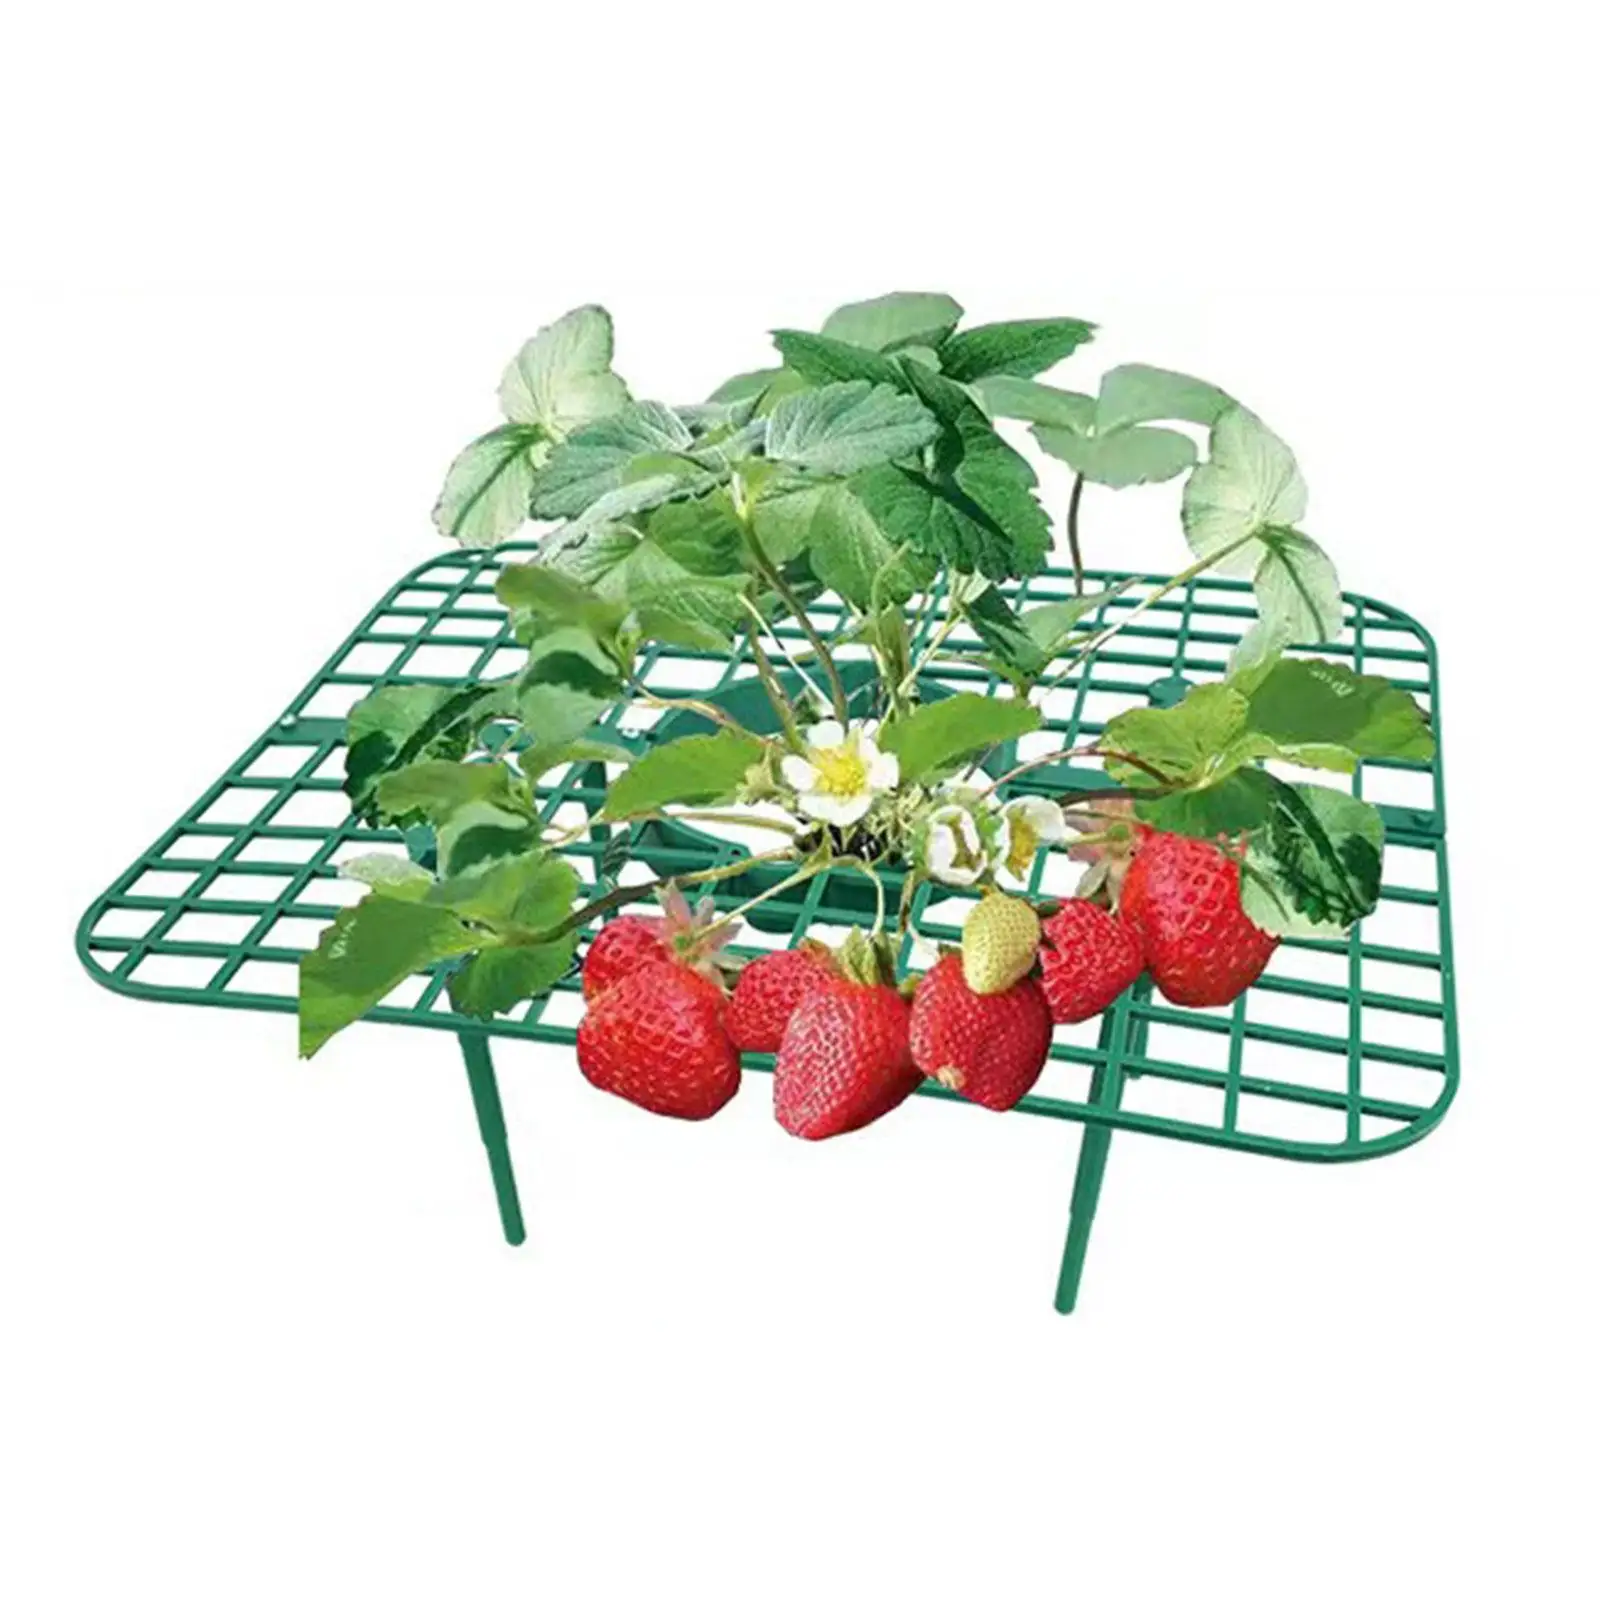 10x Strawberry Plant Supports Strawberry Growing Racks Vegetable Rack Strawberry Growing Fruit Support for Indoor Yard Lawn